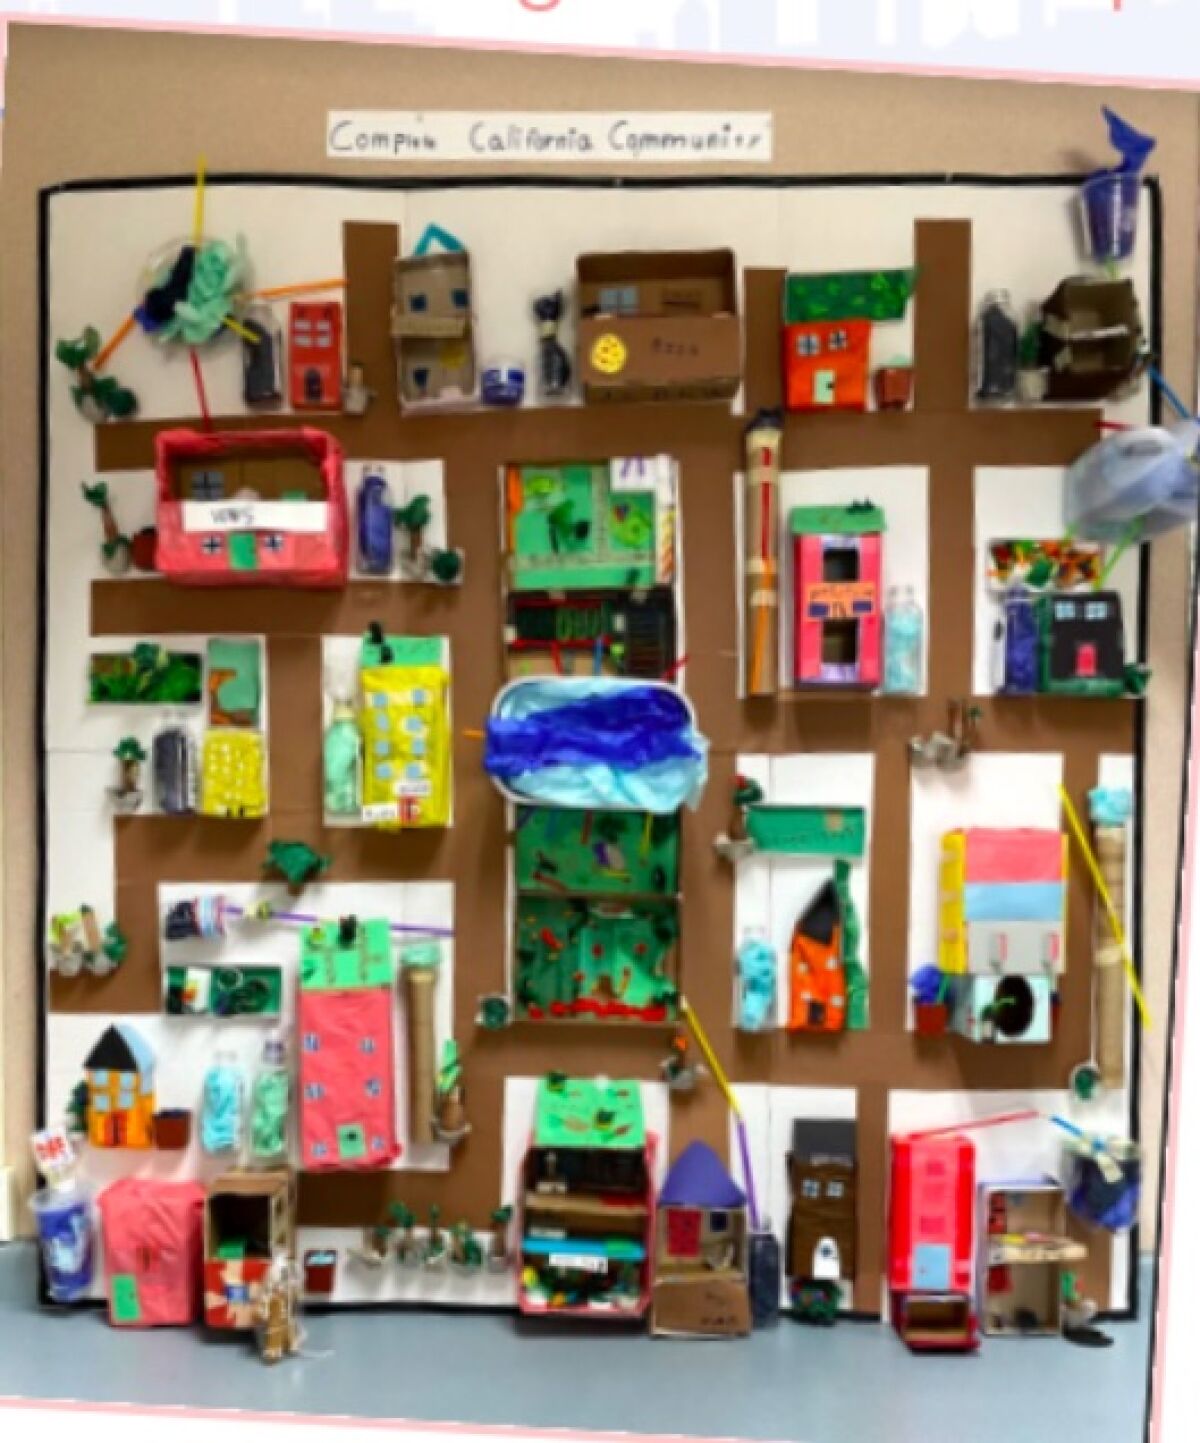 Students designed a "Complete California Community"